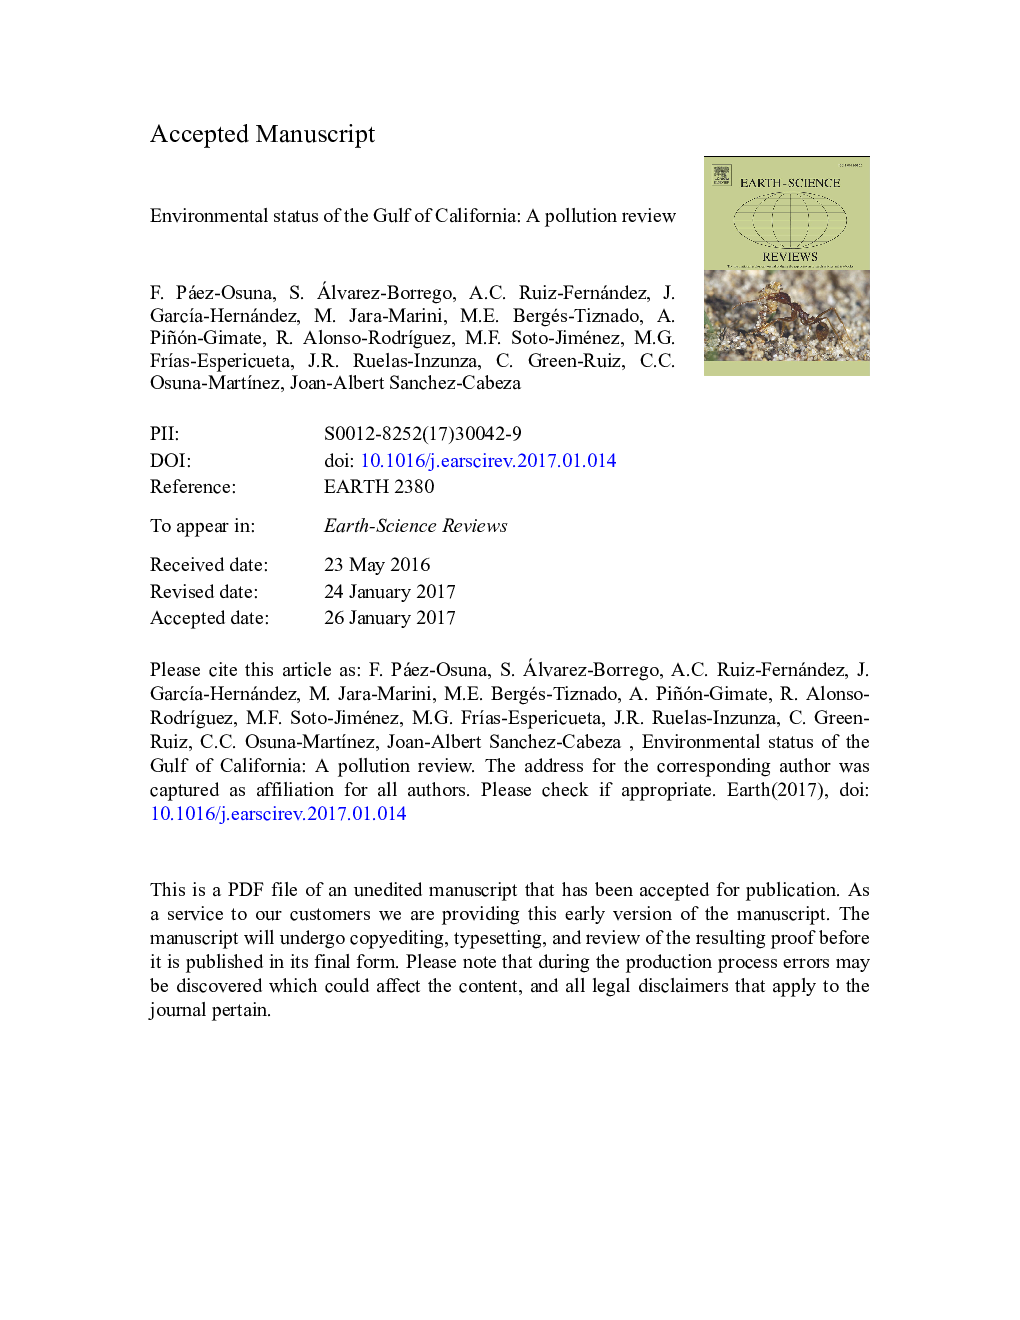 Environmental status of the Gulf of California: A pollution review